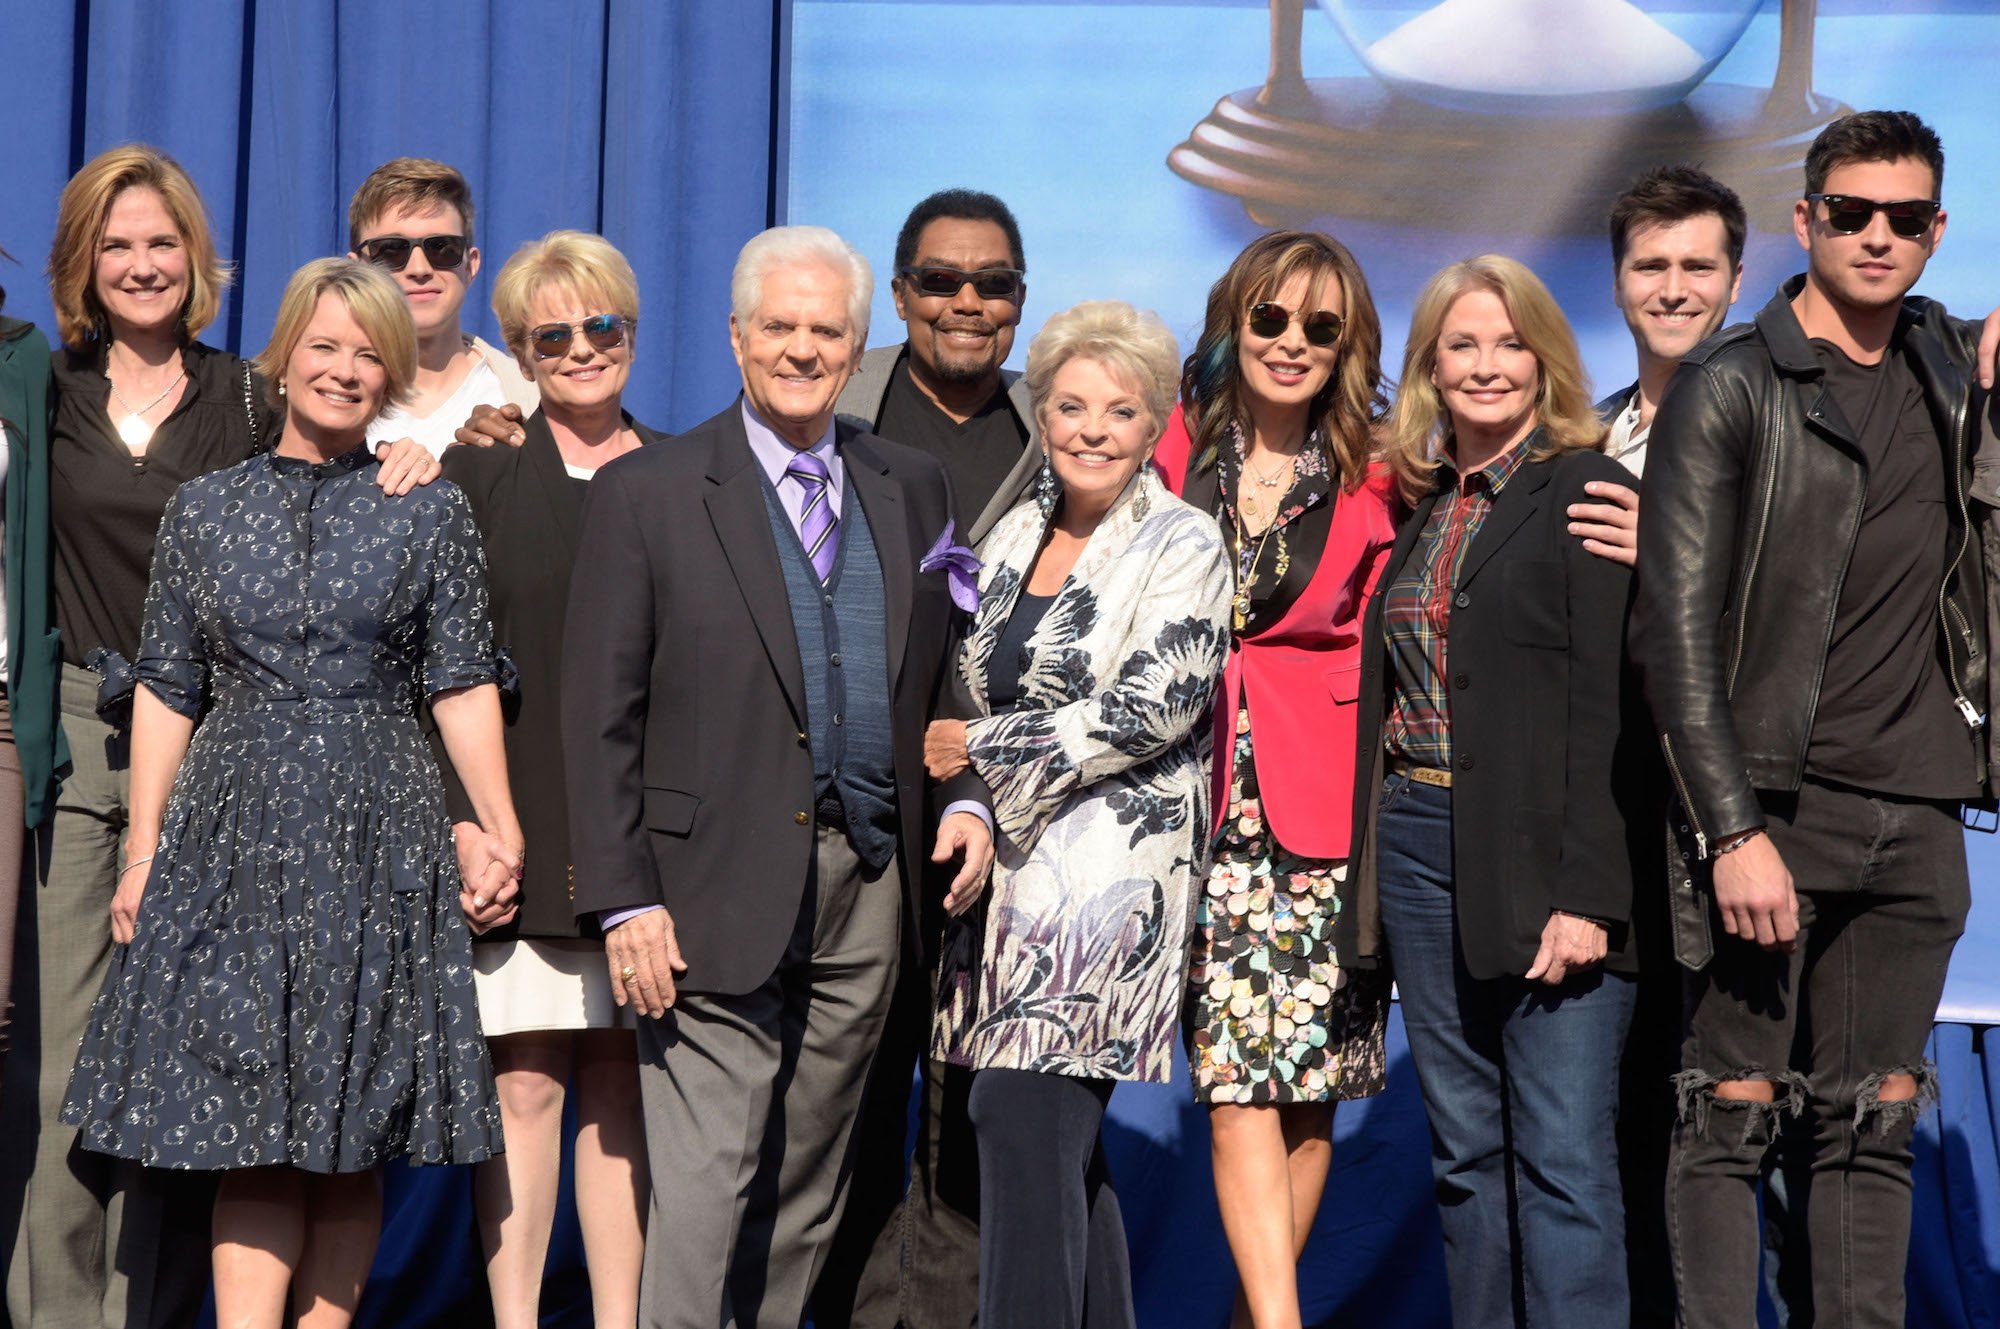 'Days of Our Lives' cast